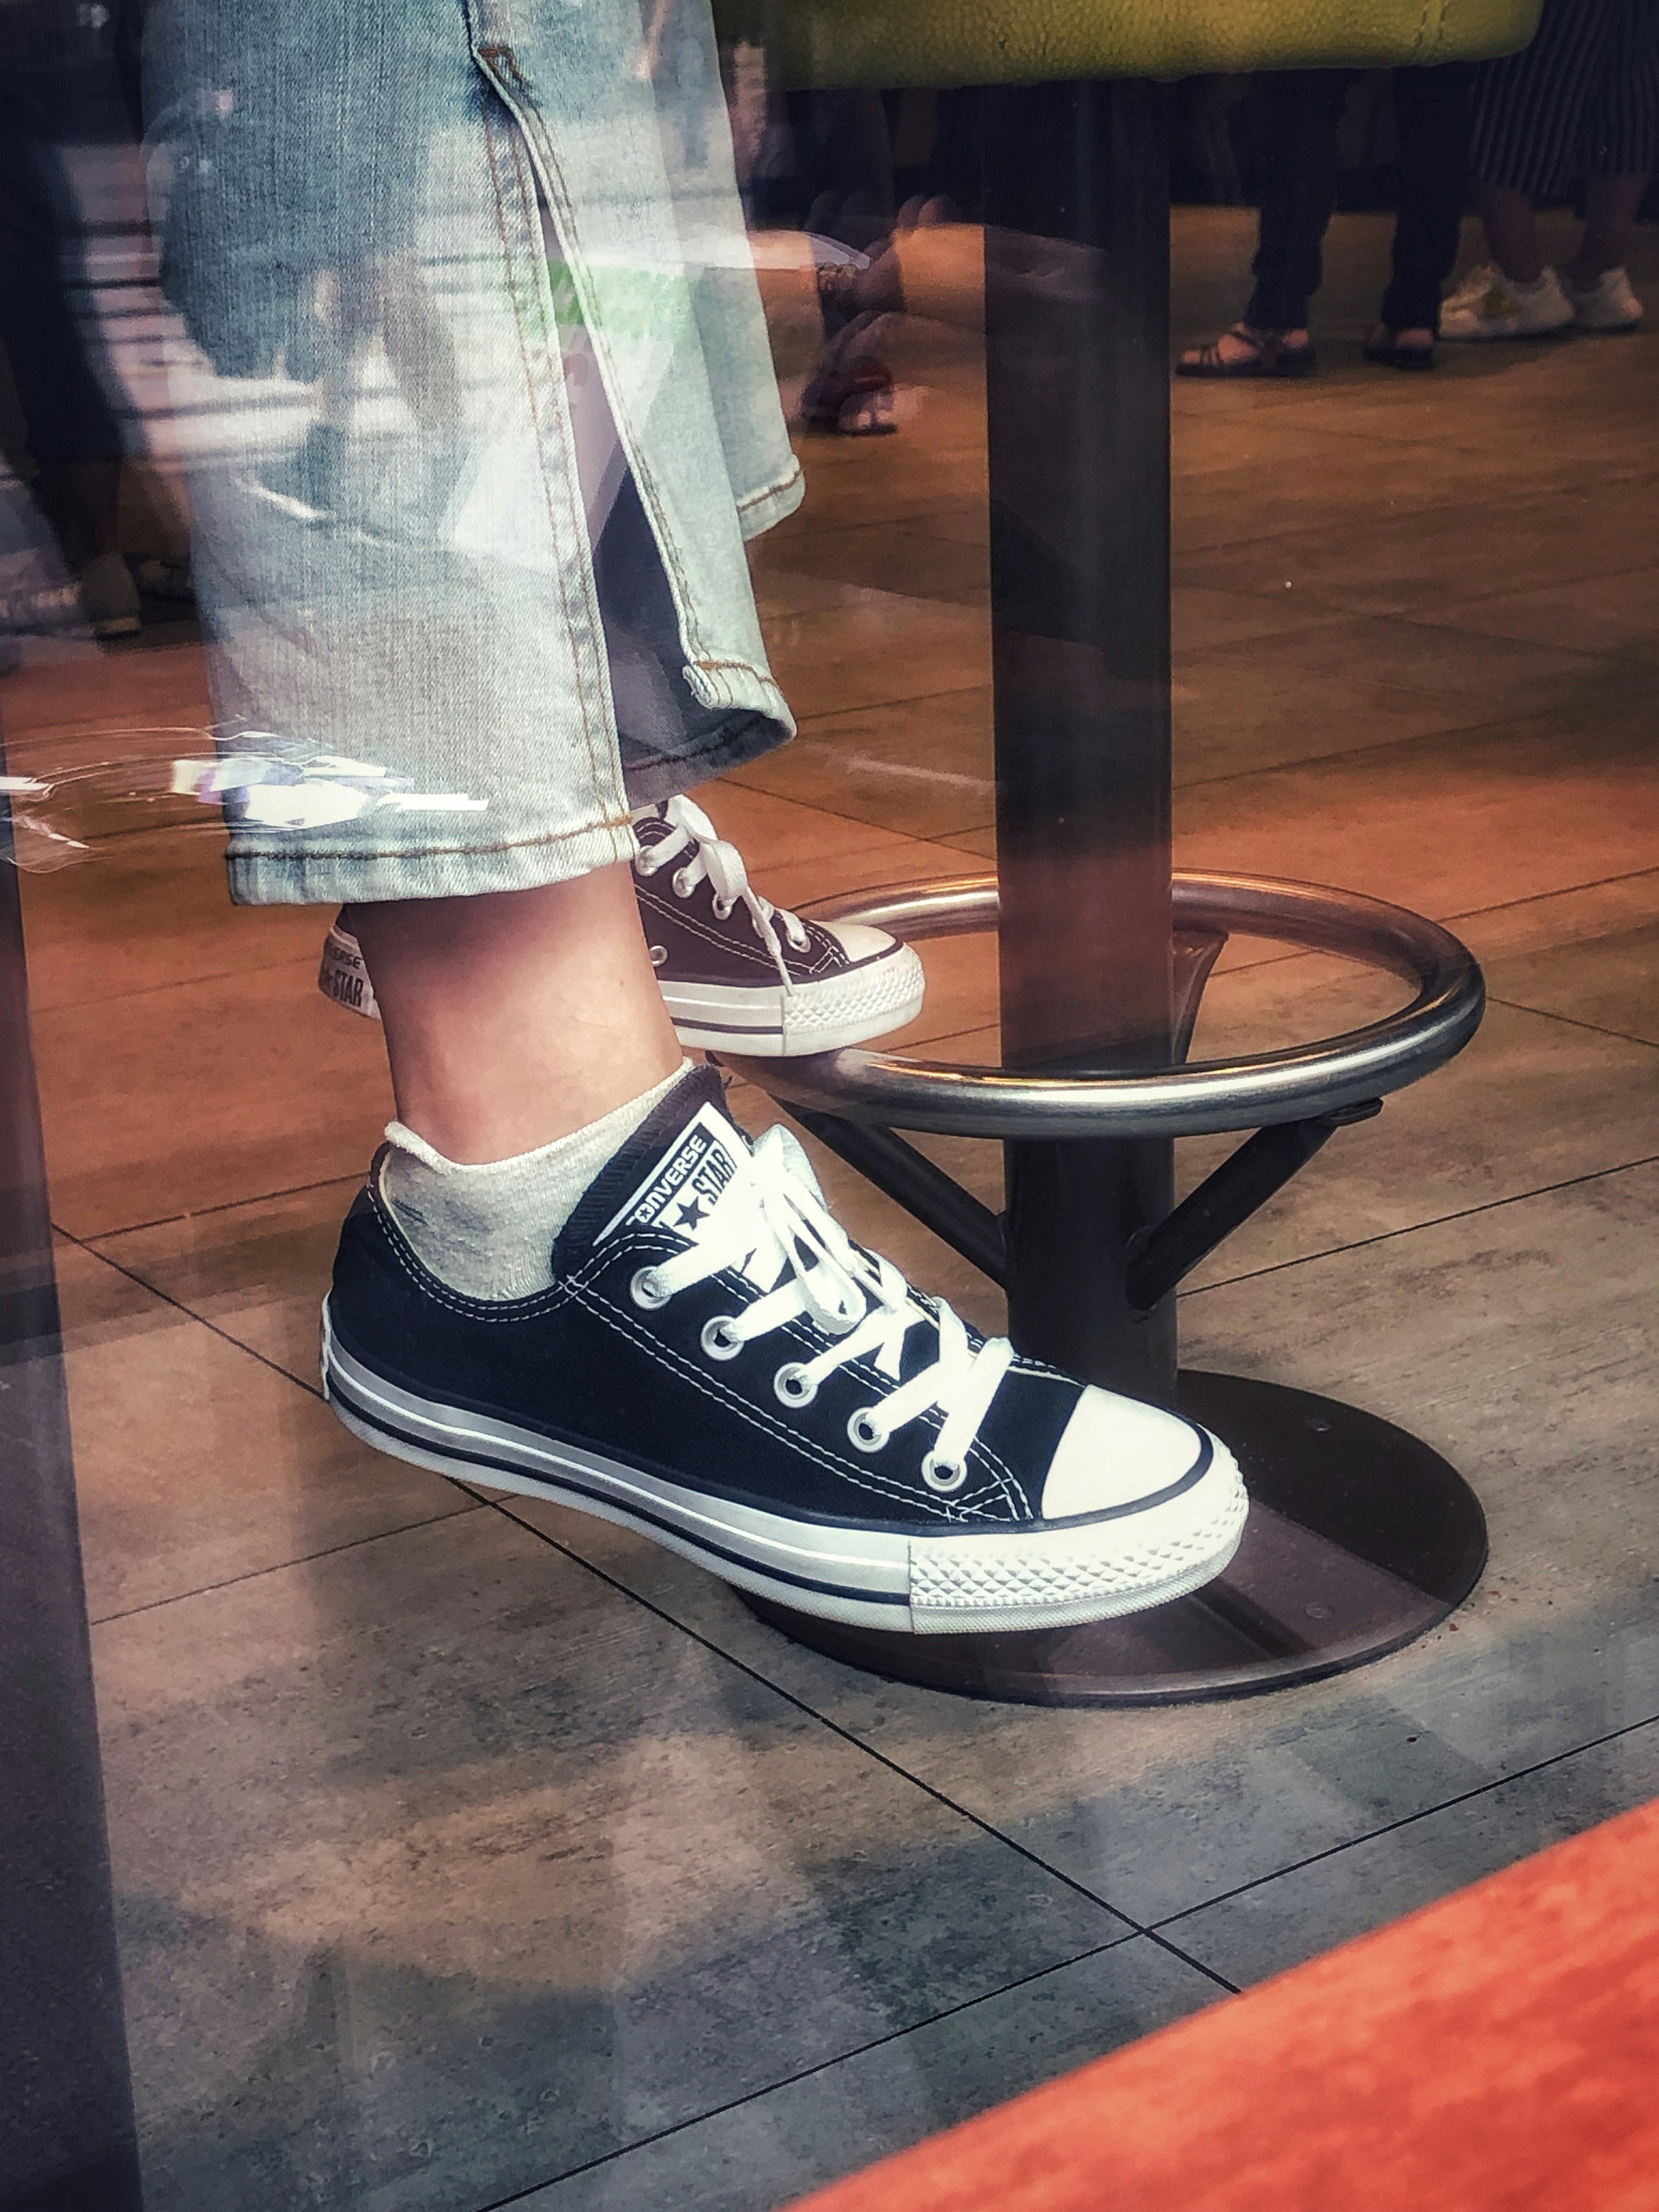 pair of black-and-white Converse All-Star low-top shoes